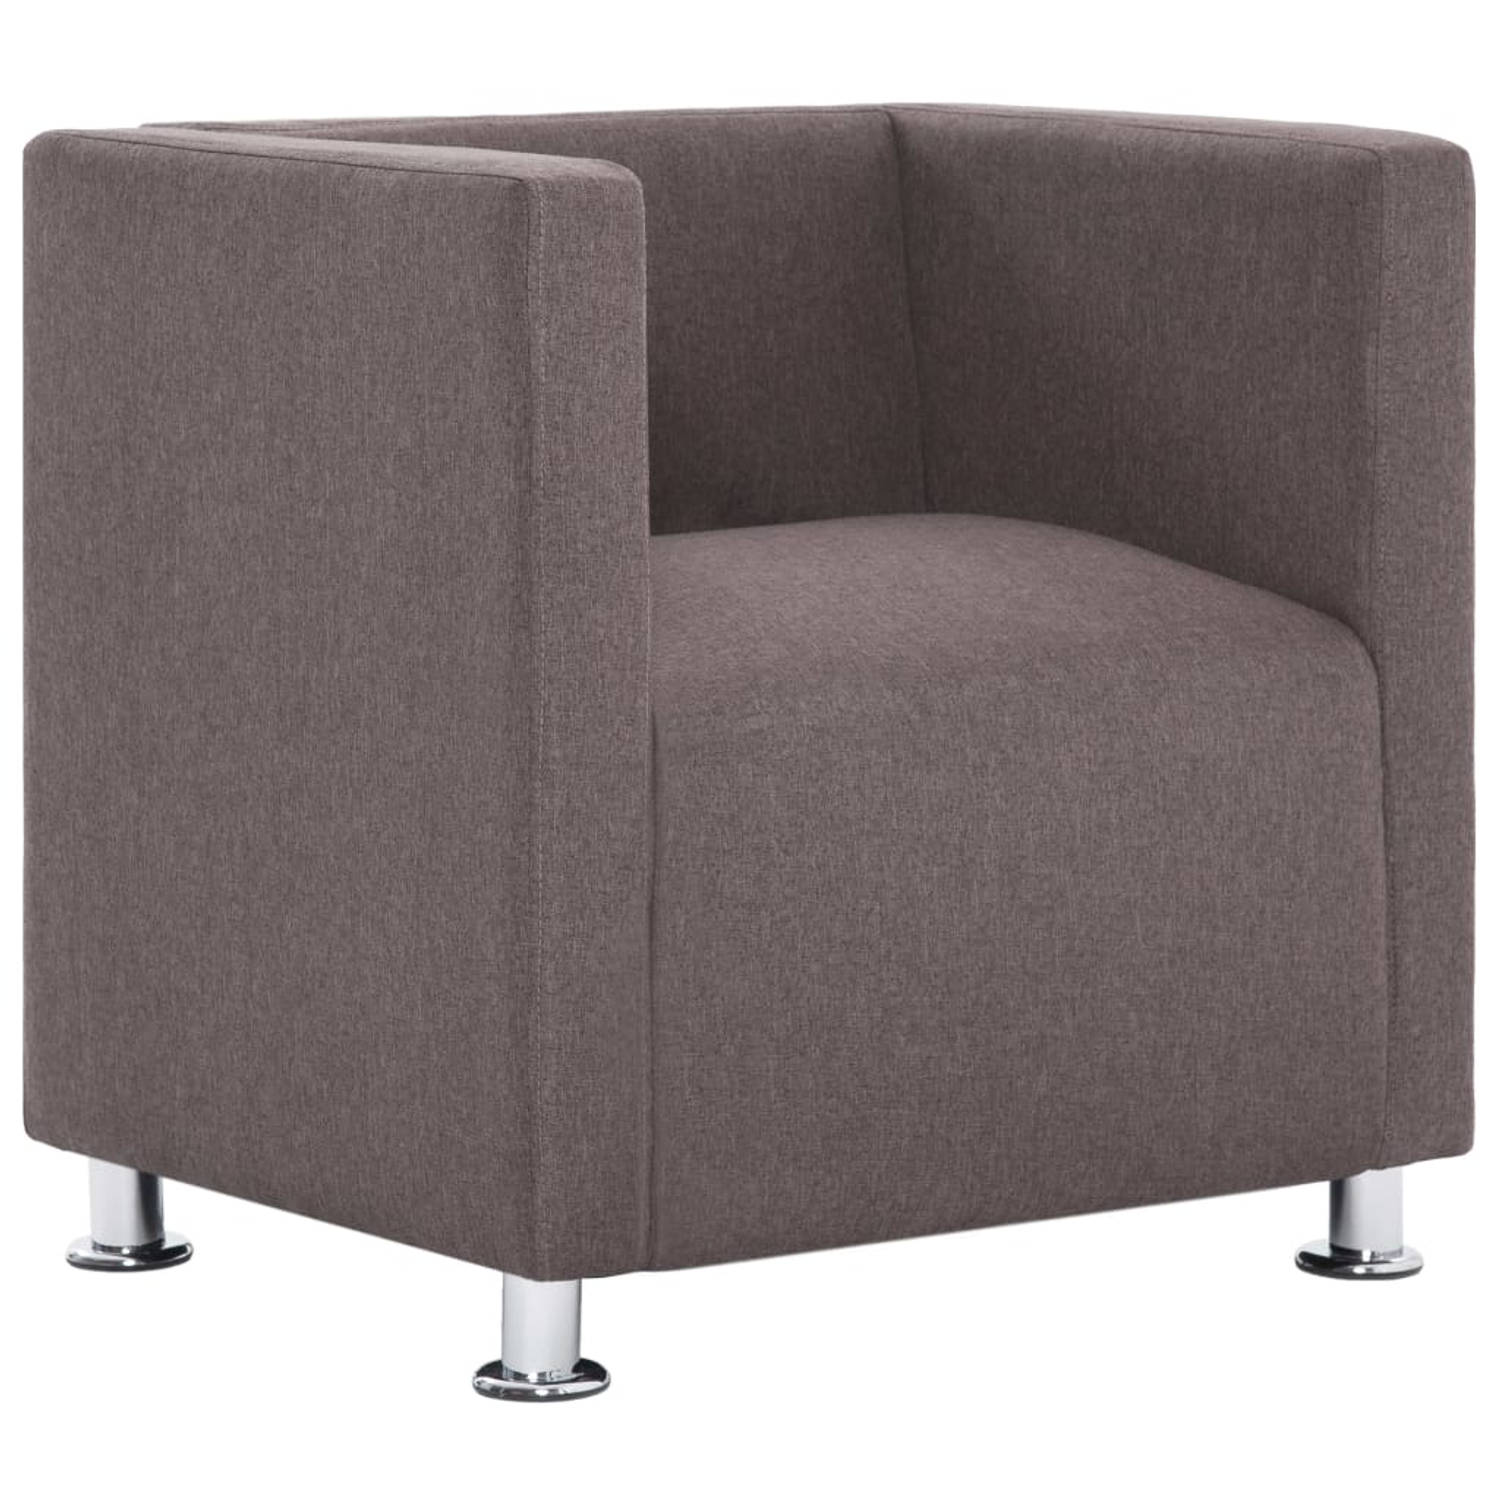 The Living Store Fauteuil kubus stof taupe - Fauteuil